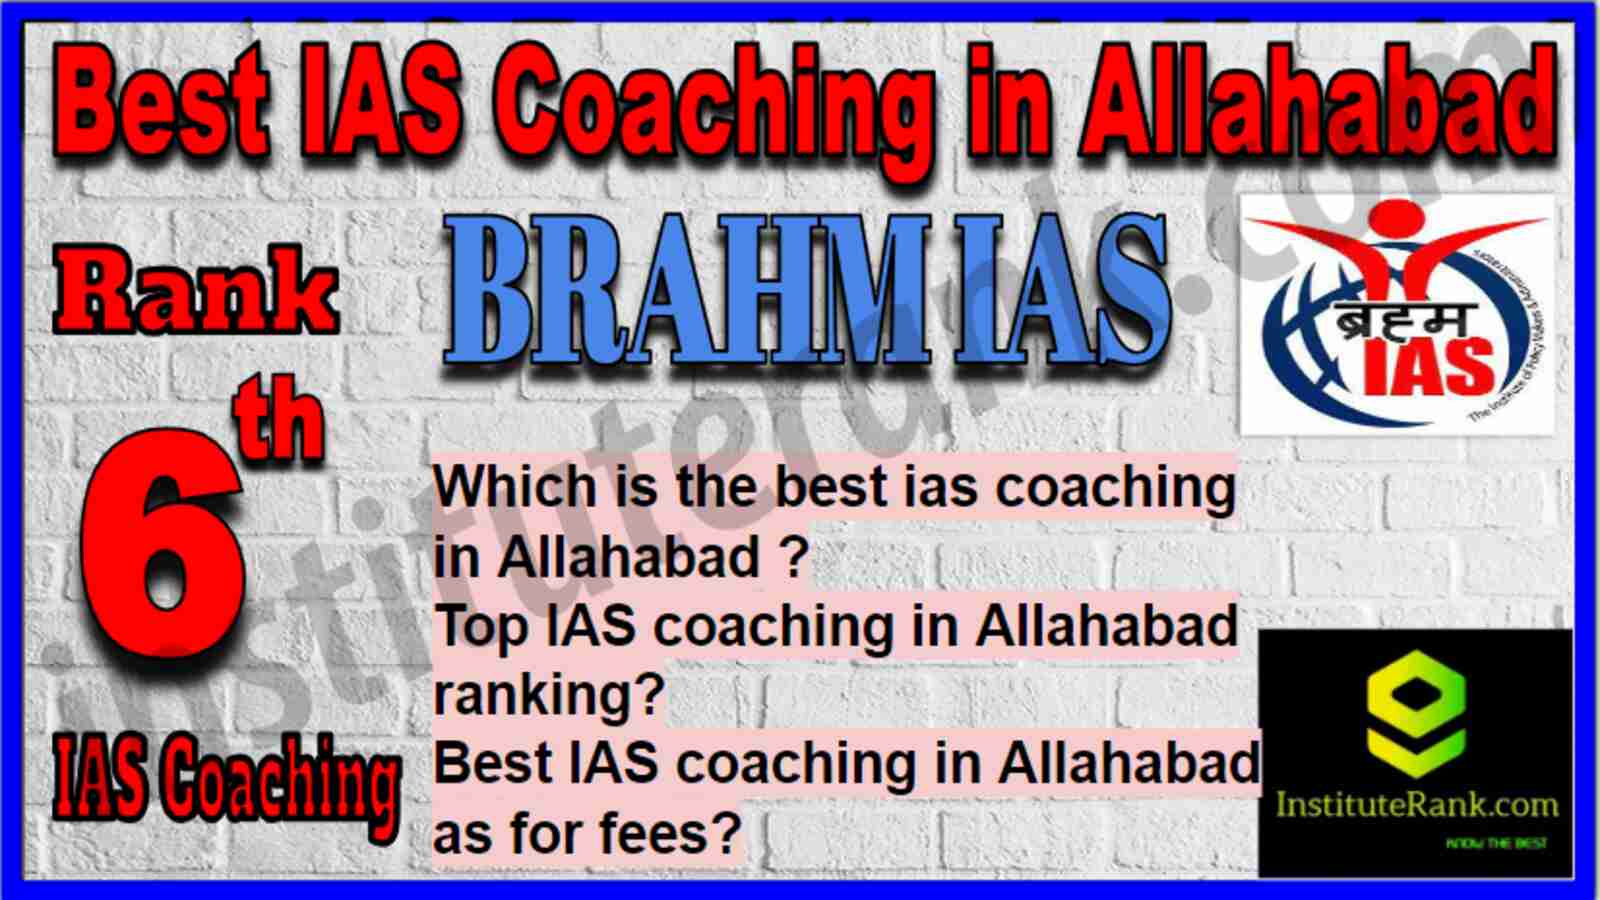 Rank 6 Best IAS Coaching in Allahabad